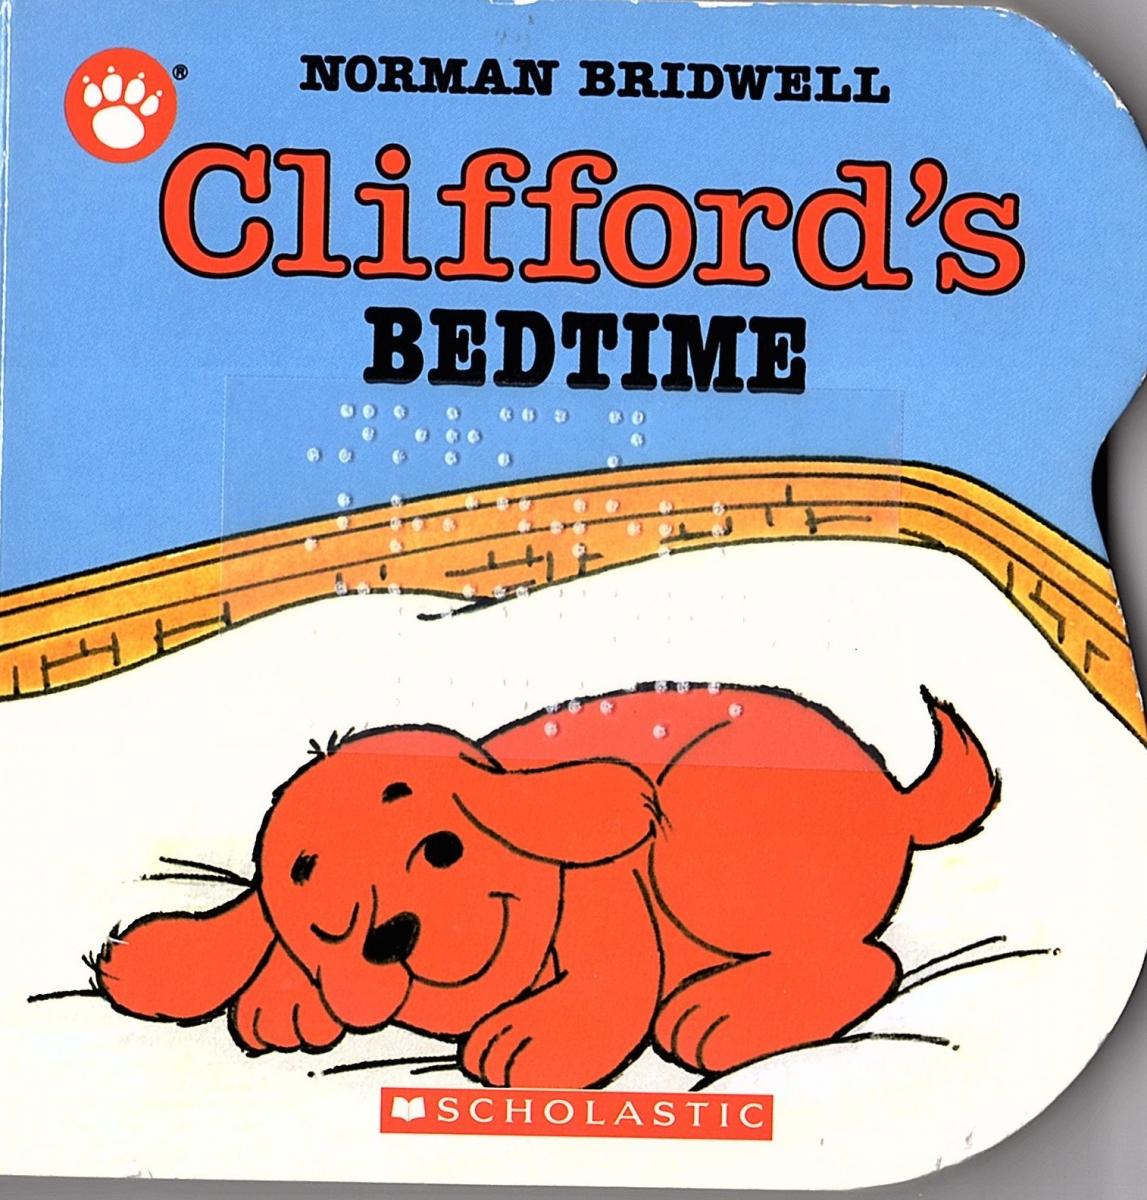 Cover of Clifford's Bedtime with braille label.